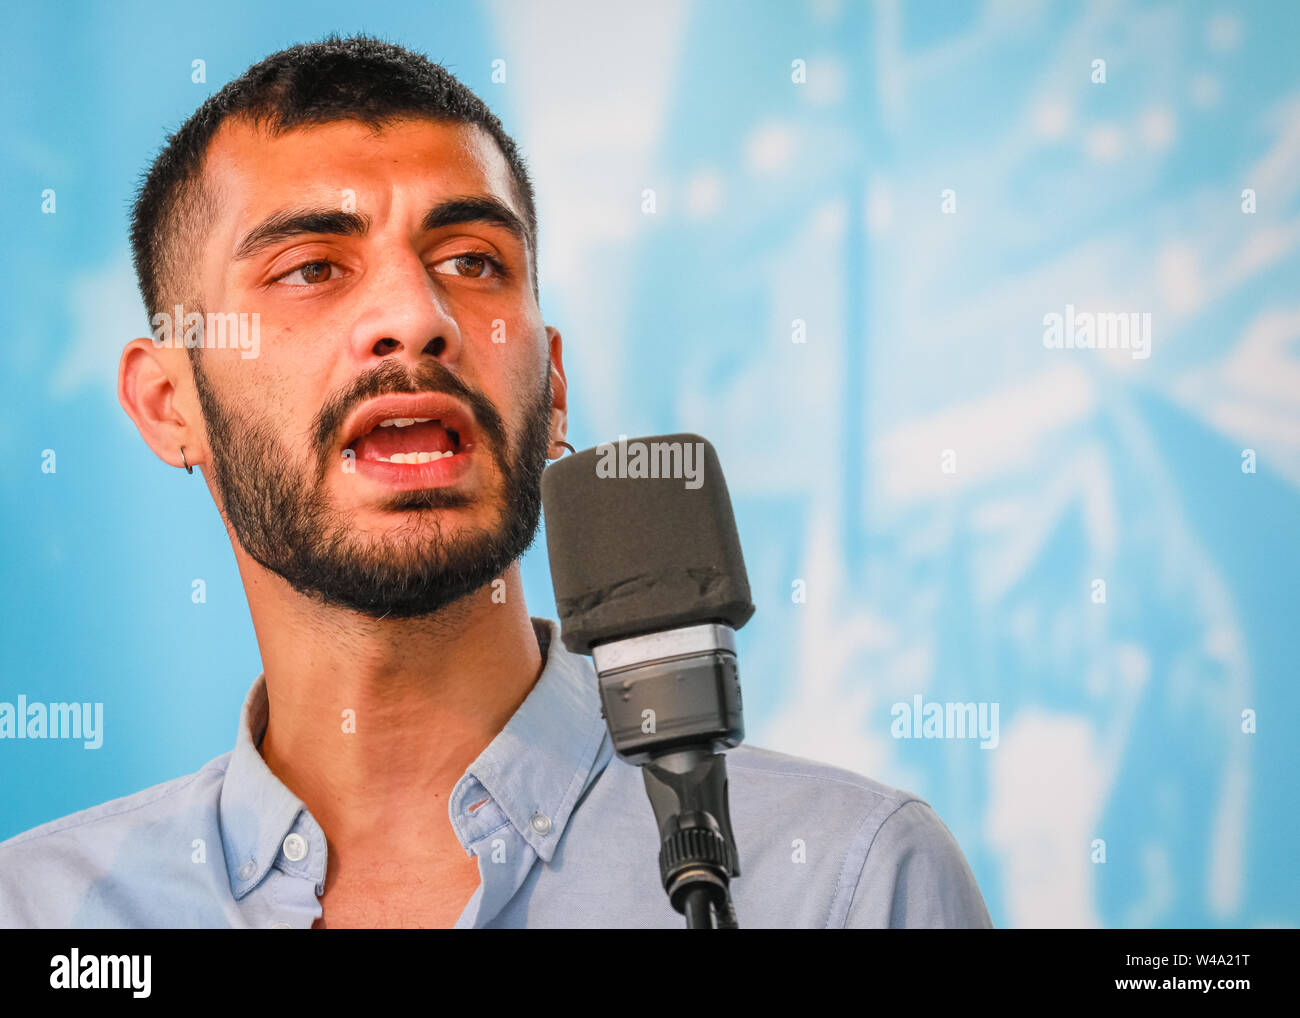 Shamir Sanni, Vote Leave whistleblower and activist, speaks on stage at the 'March for Change' anti-Brexit protest in Westminster, London, UK Stock Photo